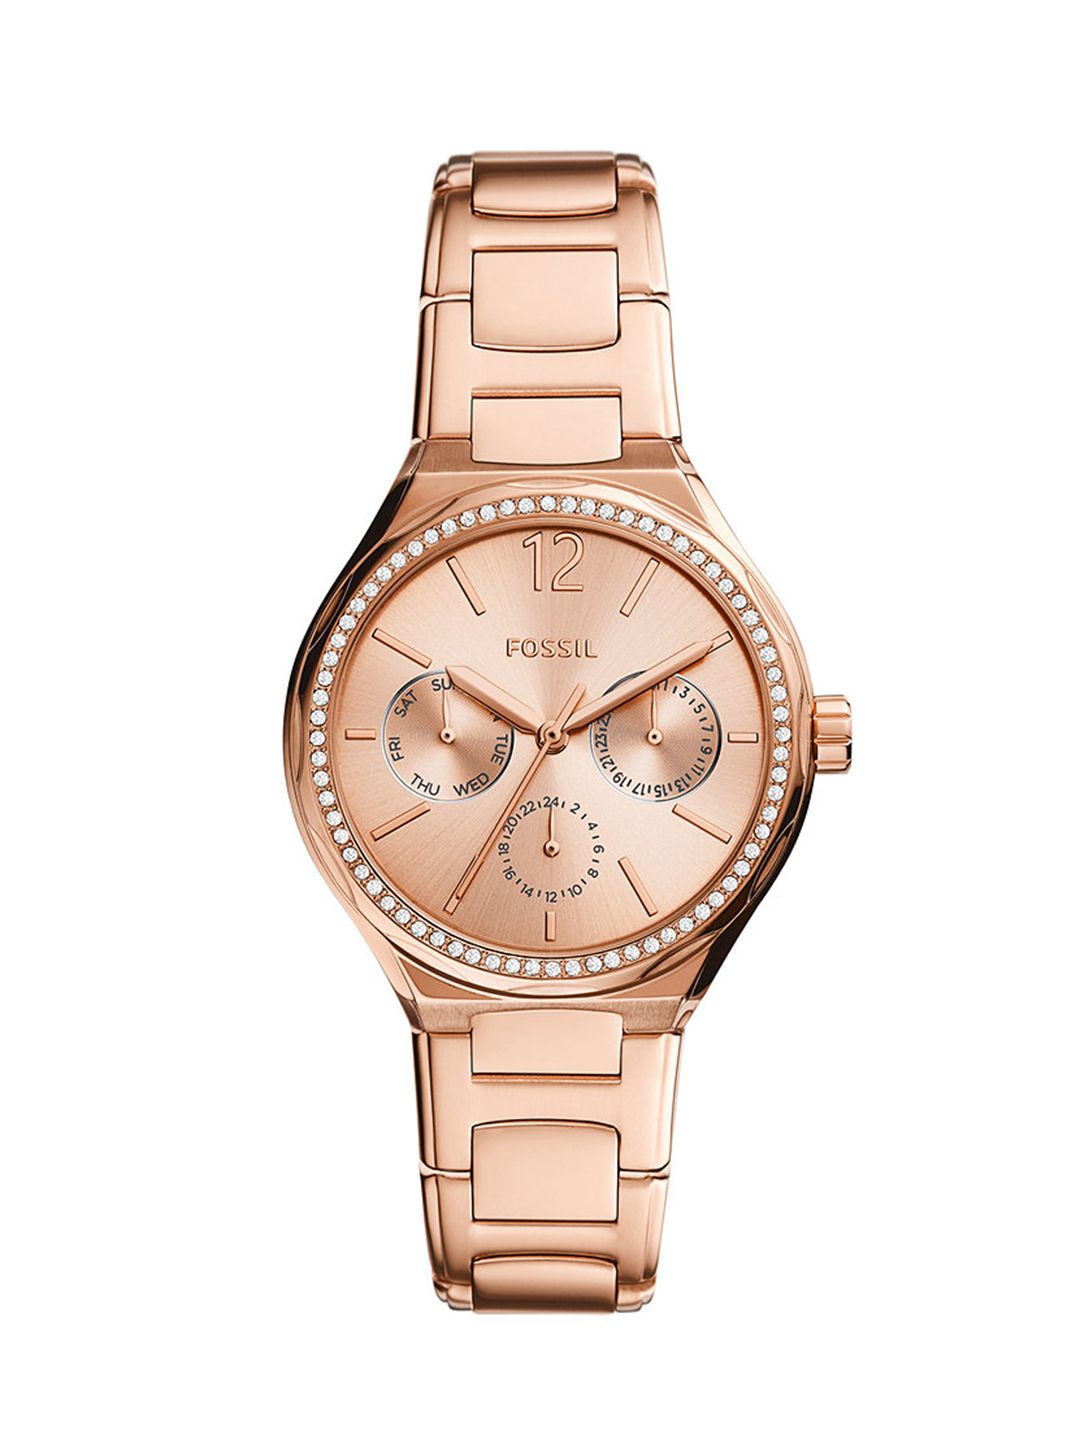 Fossil Women Rose Gold-Toned  Analogue Chronograph Watch BQ3721 Price in India